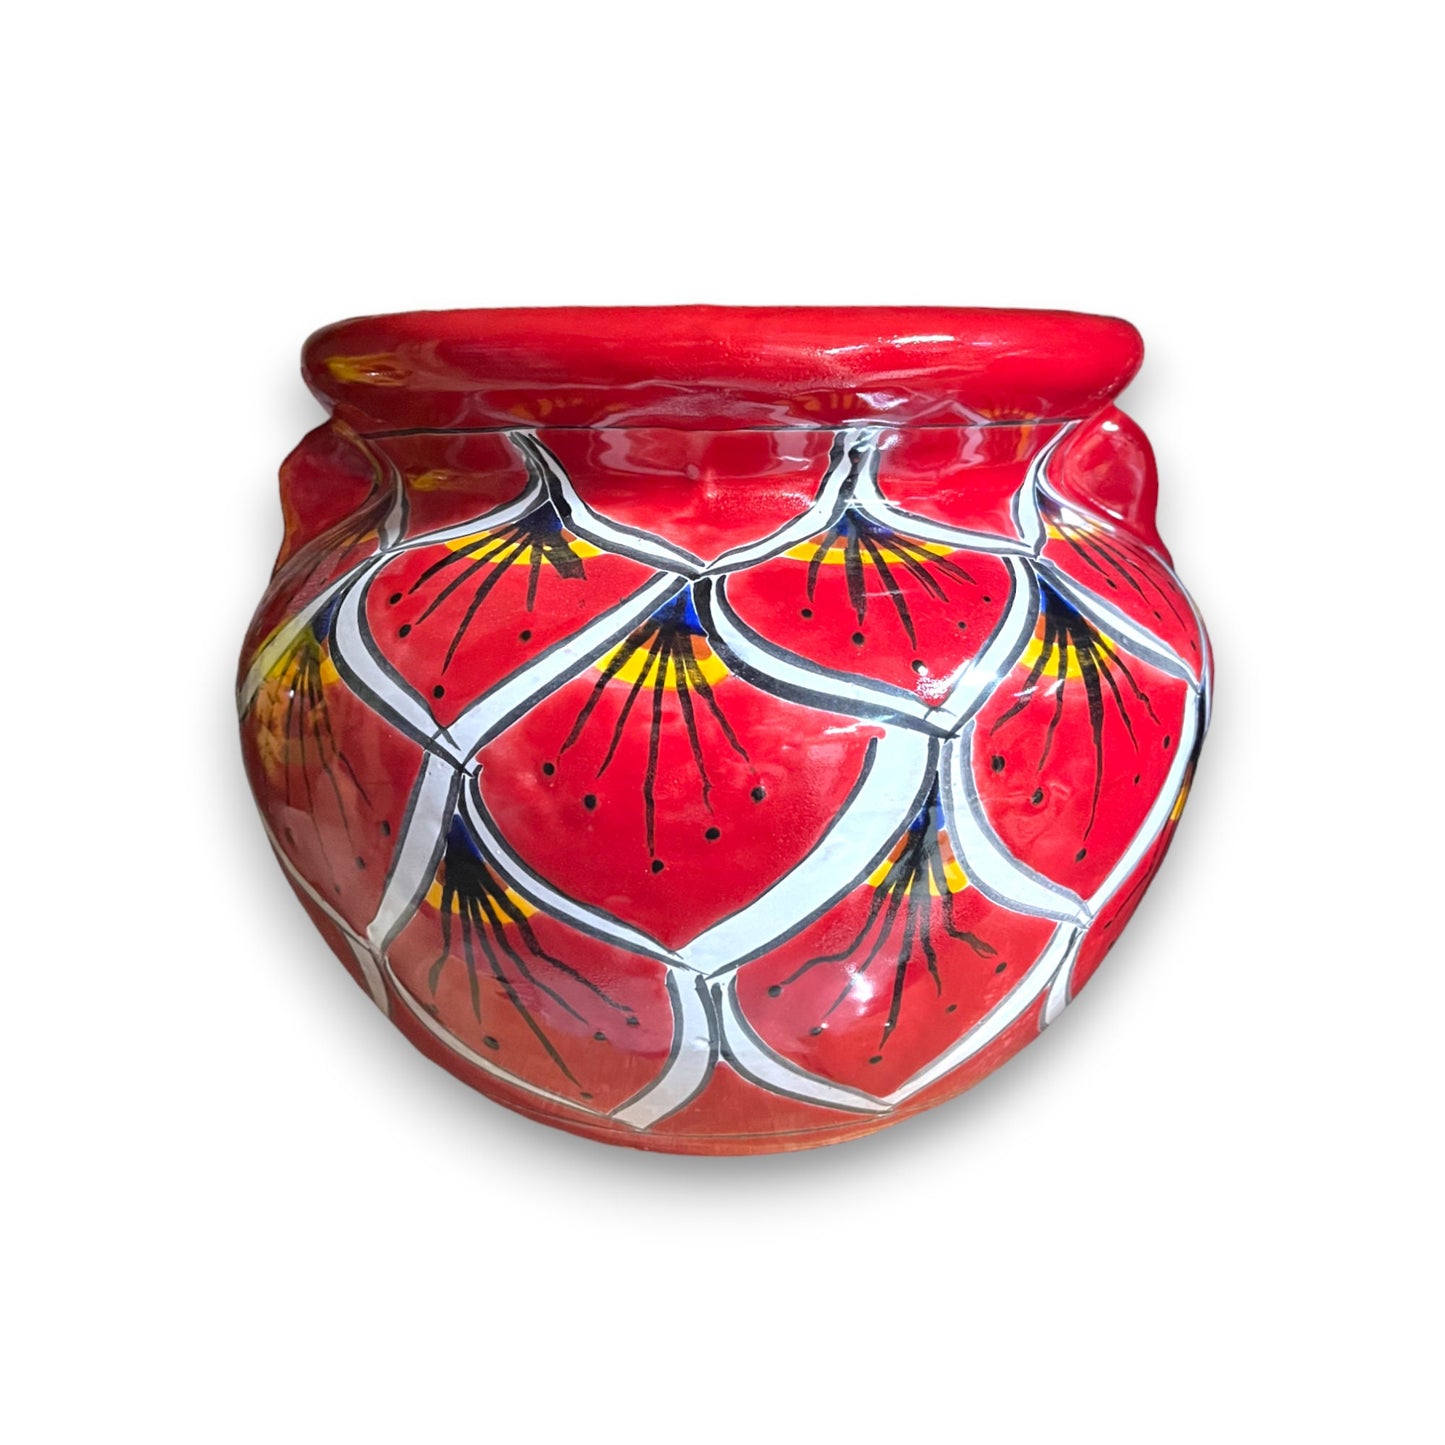 Hand-Painted Talavera Flower Pot | Artisan-Crafted Red Peacock Decor Planter